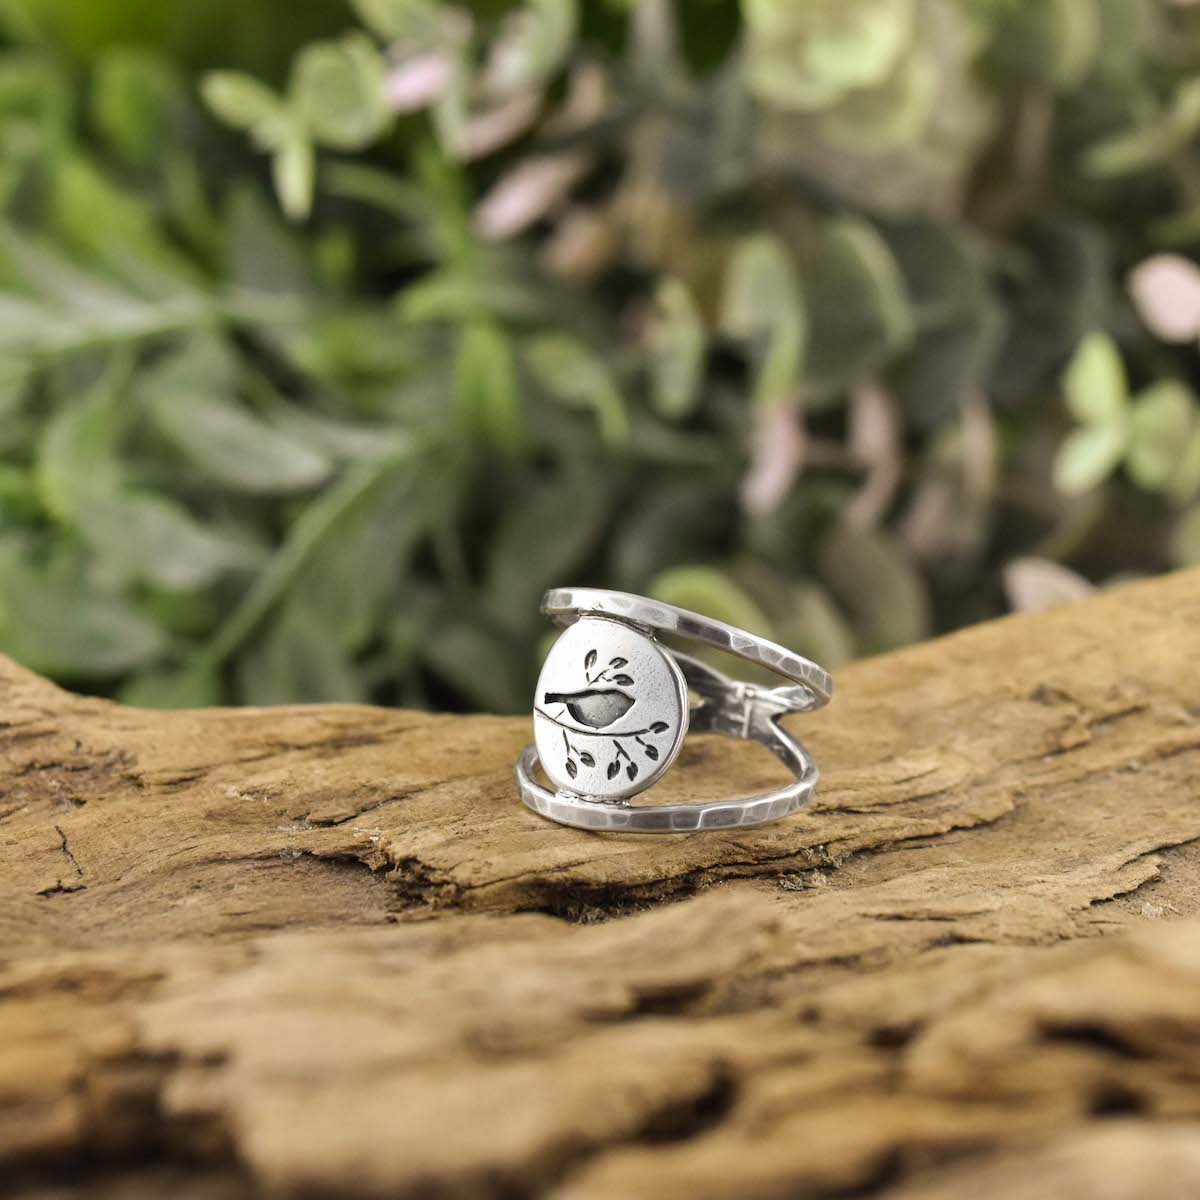 Summer Songbird Ring - Ring  Select Size  4 3121 - handmade by Beth Millner Jewelry